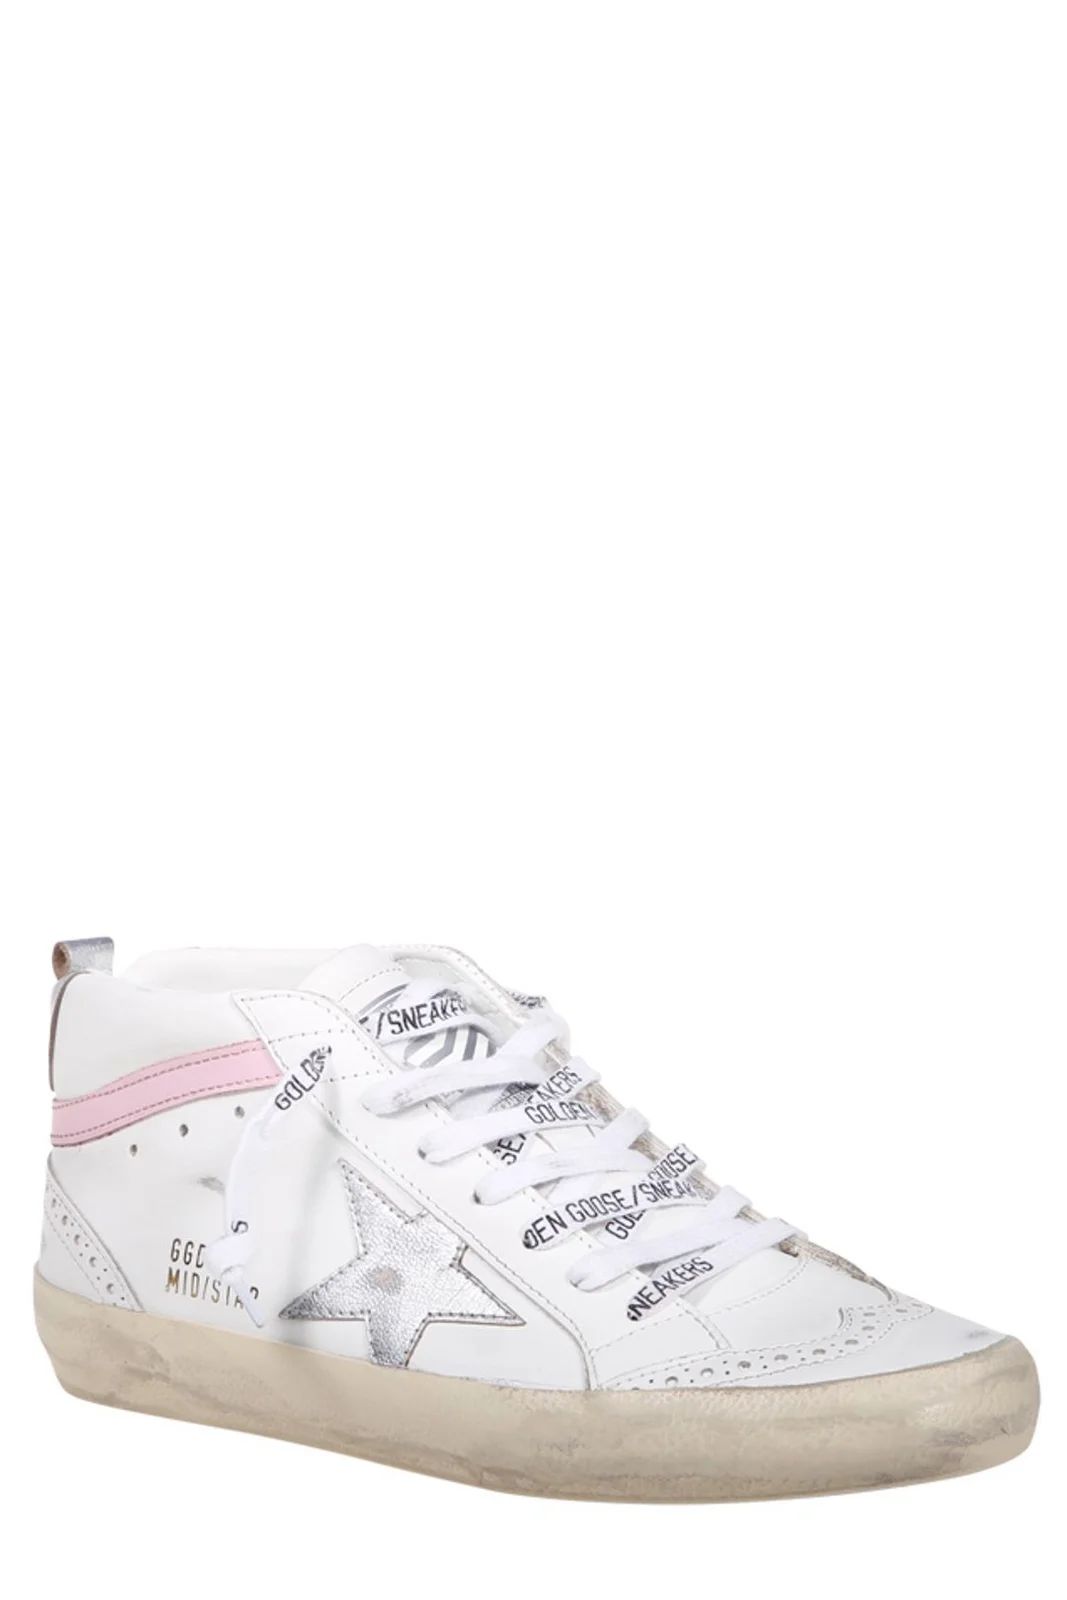 Golden Goose Deluxe Brand Mid-Star Lace-Up Sneakers | Cettire Global